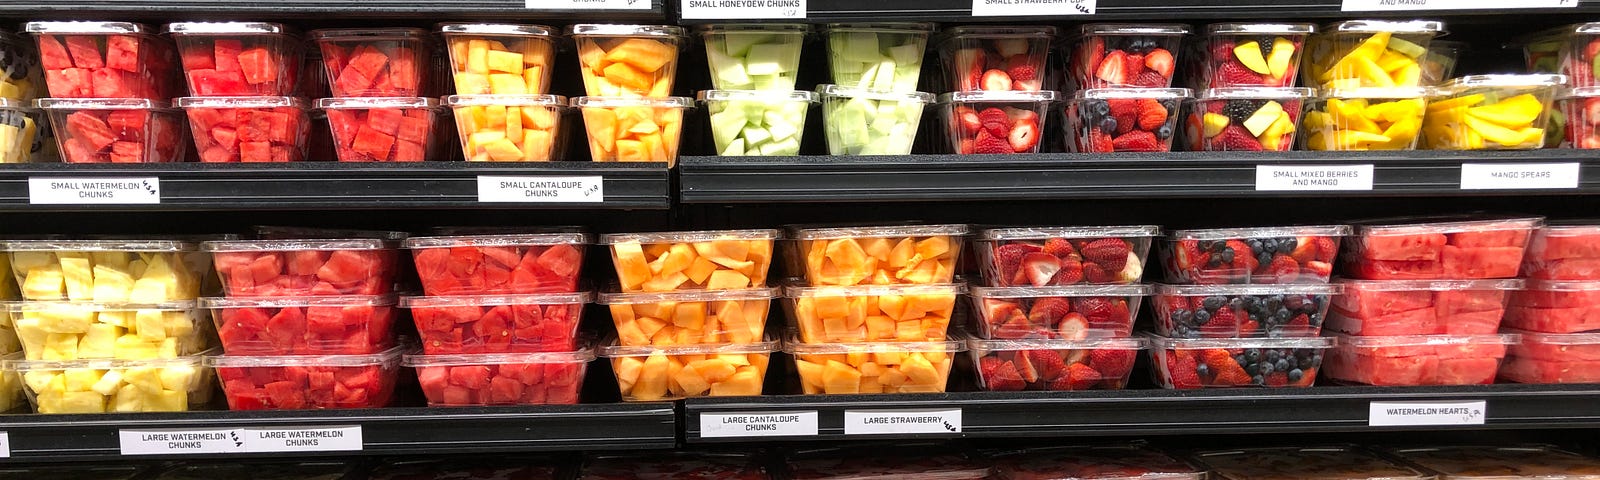 Supermarket shelves filled with overpriced plastic containers of pre-cut watermelon, pineapple, melon, and assorted fruit.